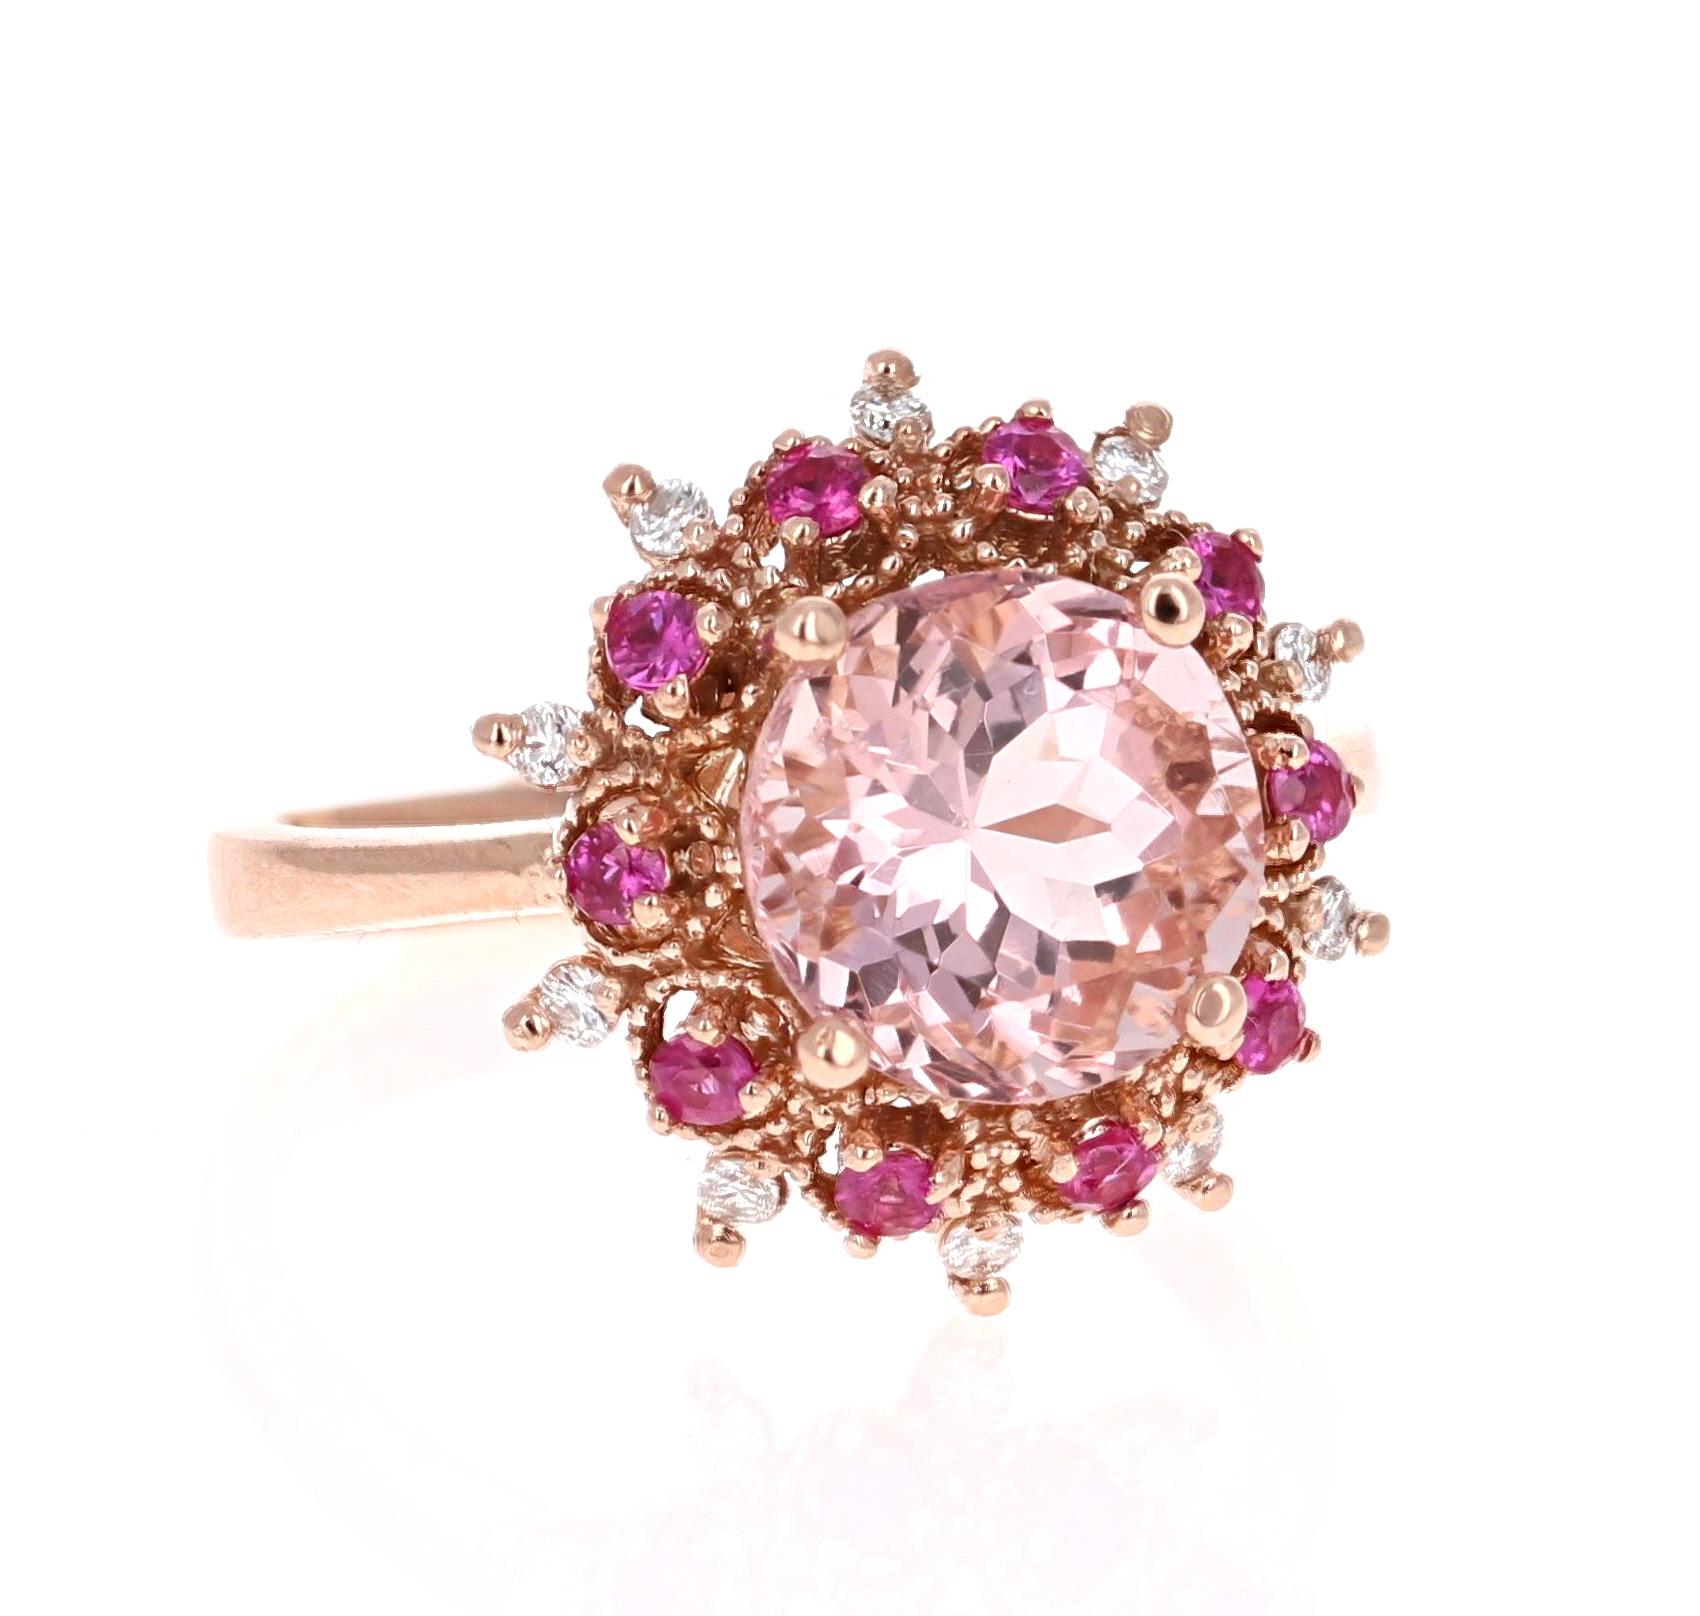 A lovely Engagement Ring Option or as an alternate to a Pink Diamond Cocktail Ring! 

This gorgeous Morganite and Diamond Ring has a 2.75 Carat Round Cut Pink Morganite and is surrounded by alternating Pink Sapphires that weigh 0.37 carats and 10